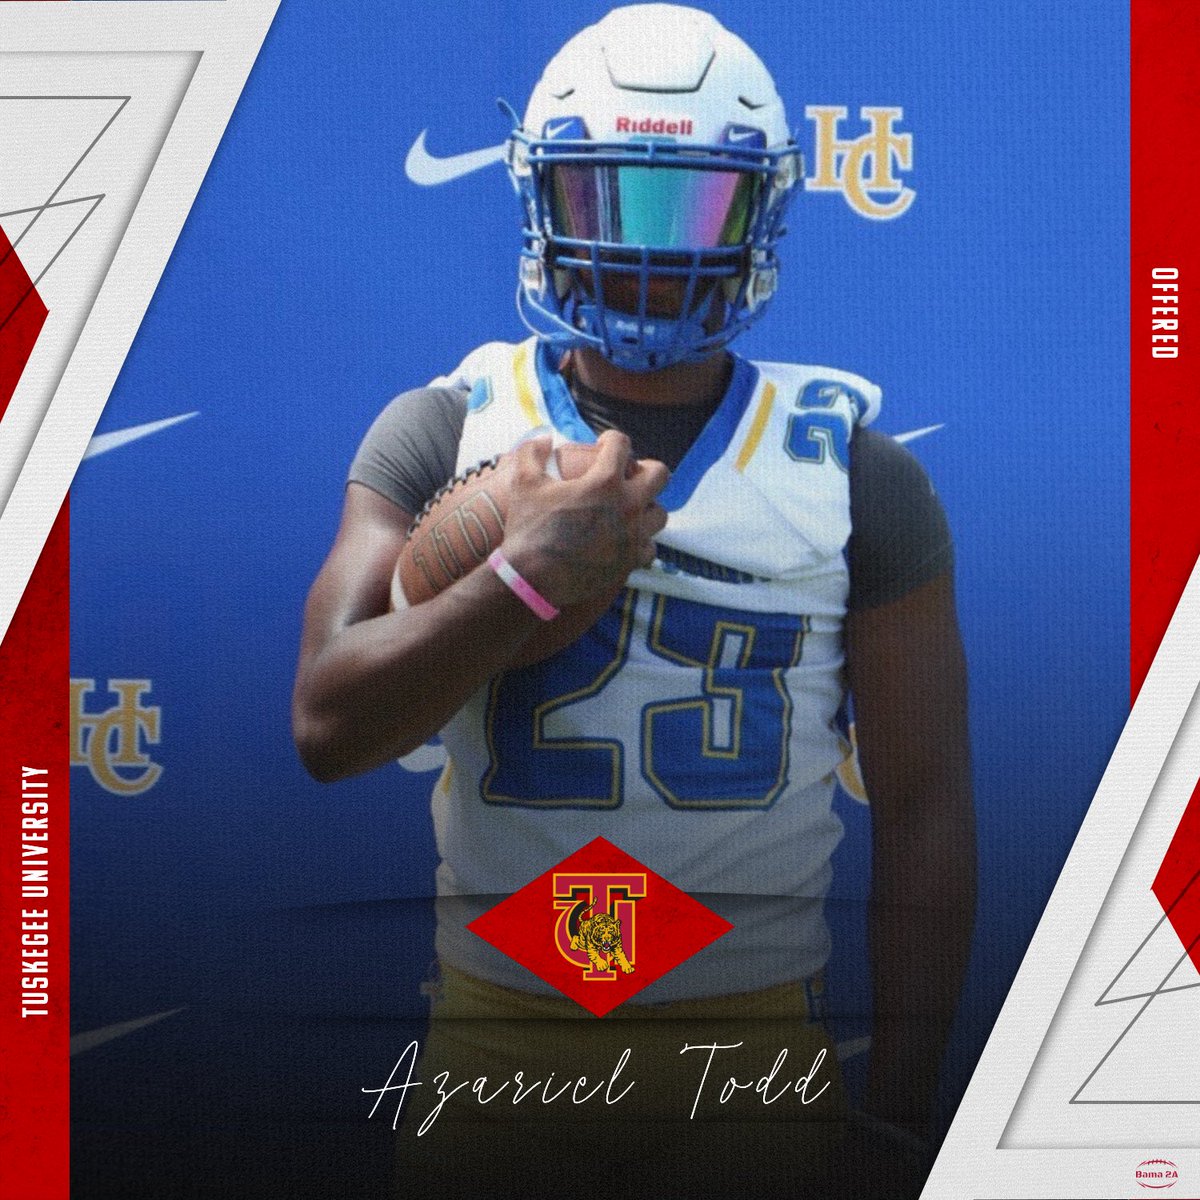 Congratulations to @ToddAzariel❗️ He was offered by @SkegeeFootball❗️